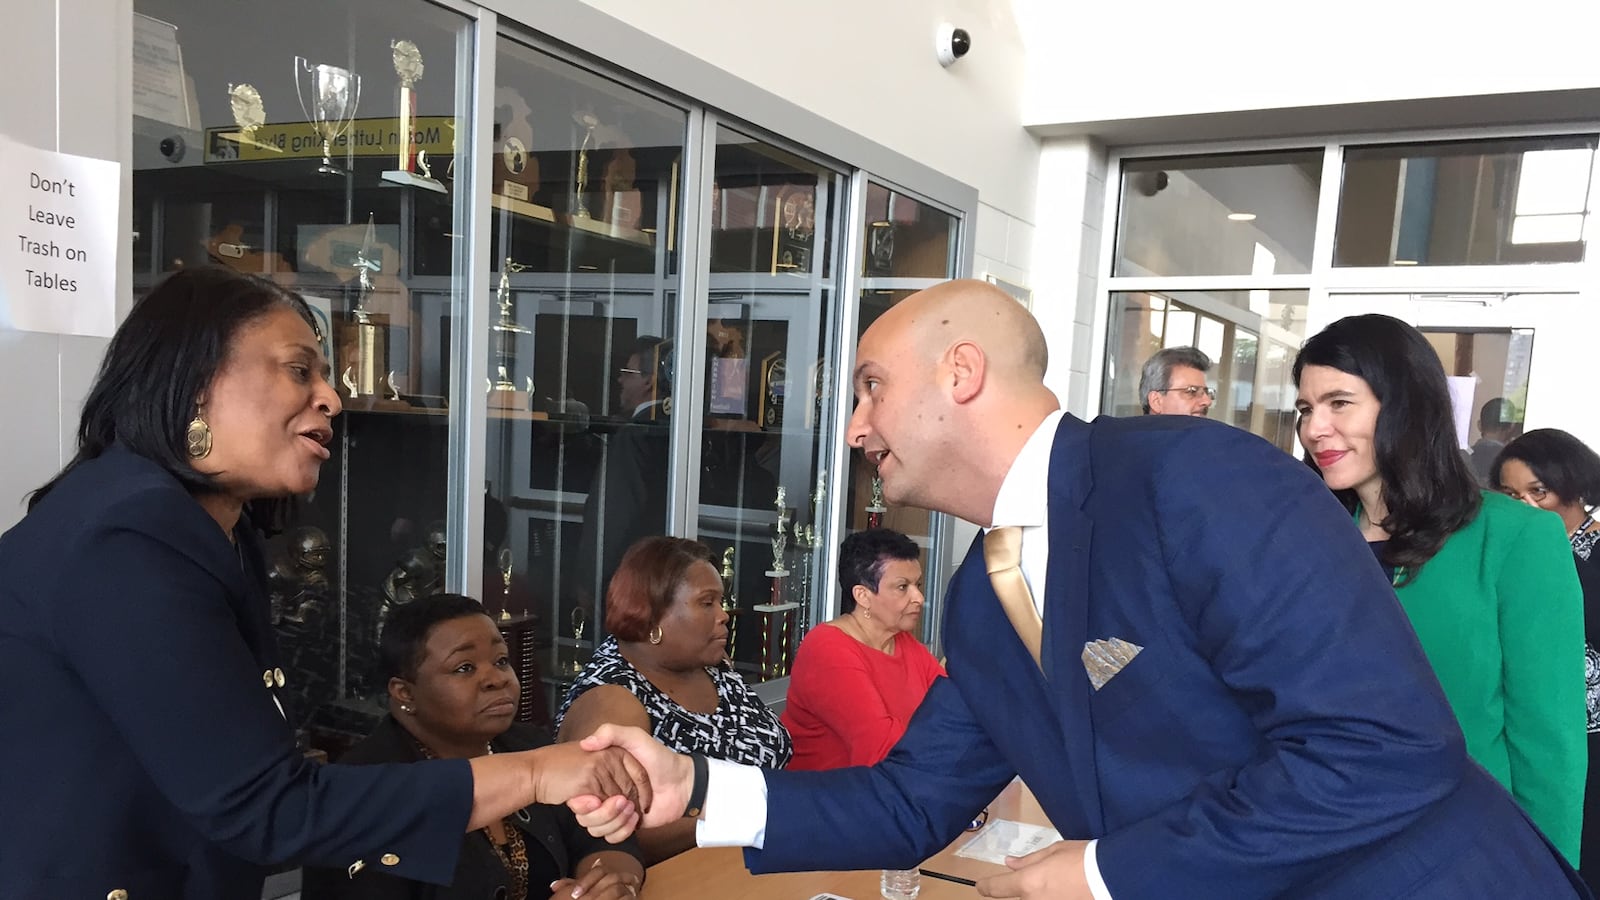 On his first day as Detroit schools superintendent, Nikolai Vitti, with former interim superintendent Alycia Meriweather, greets principals at a teacher hiring fair at Martin Luther King Jr. High School.